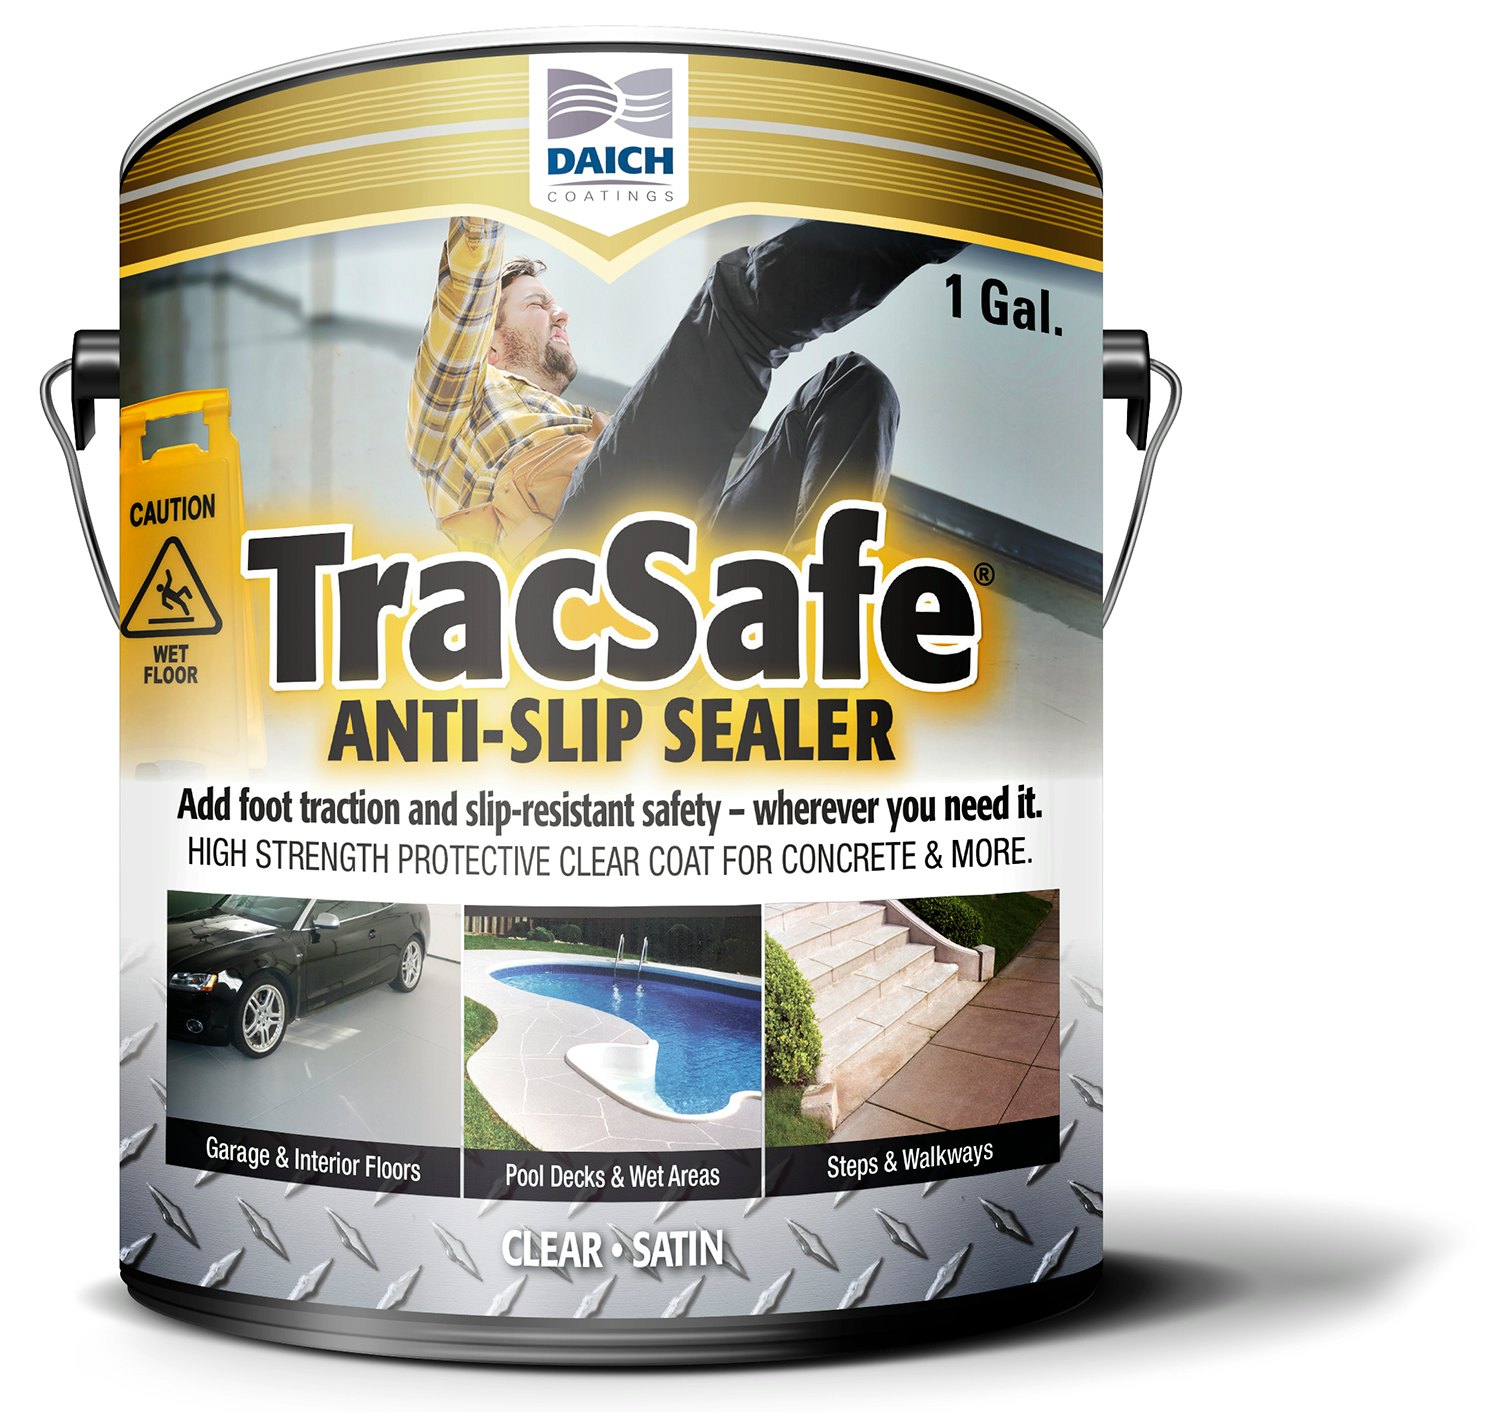 TracSafe Anti-Slip Sealer From: Daich Coatings